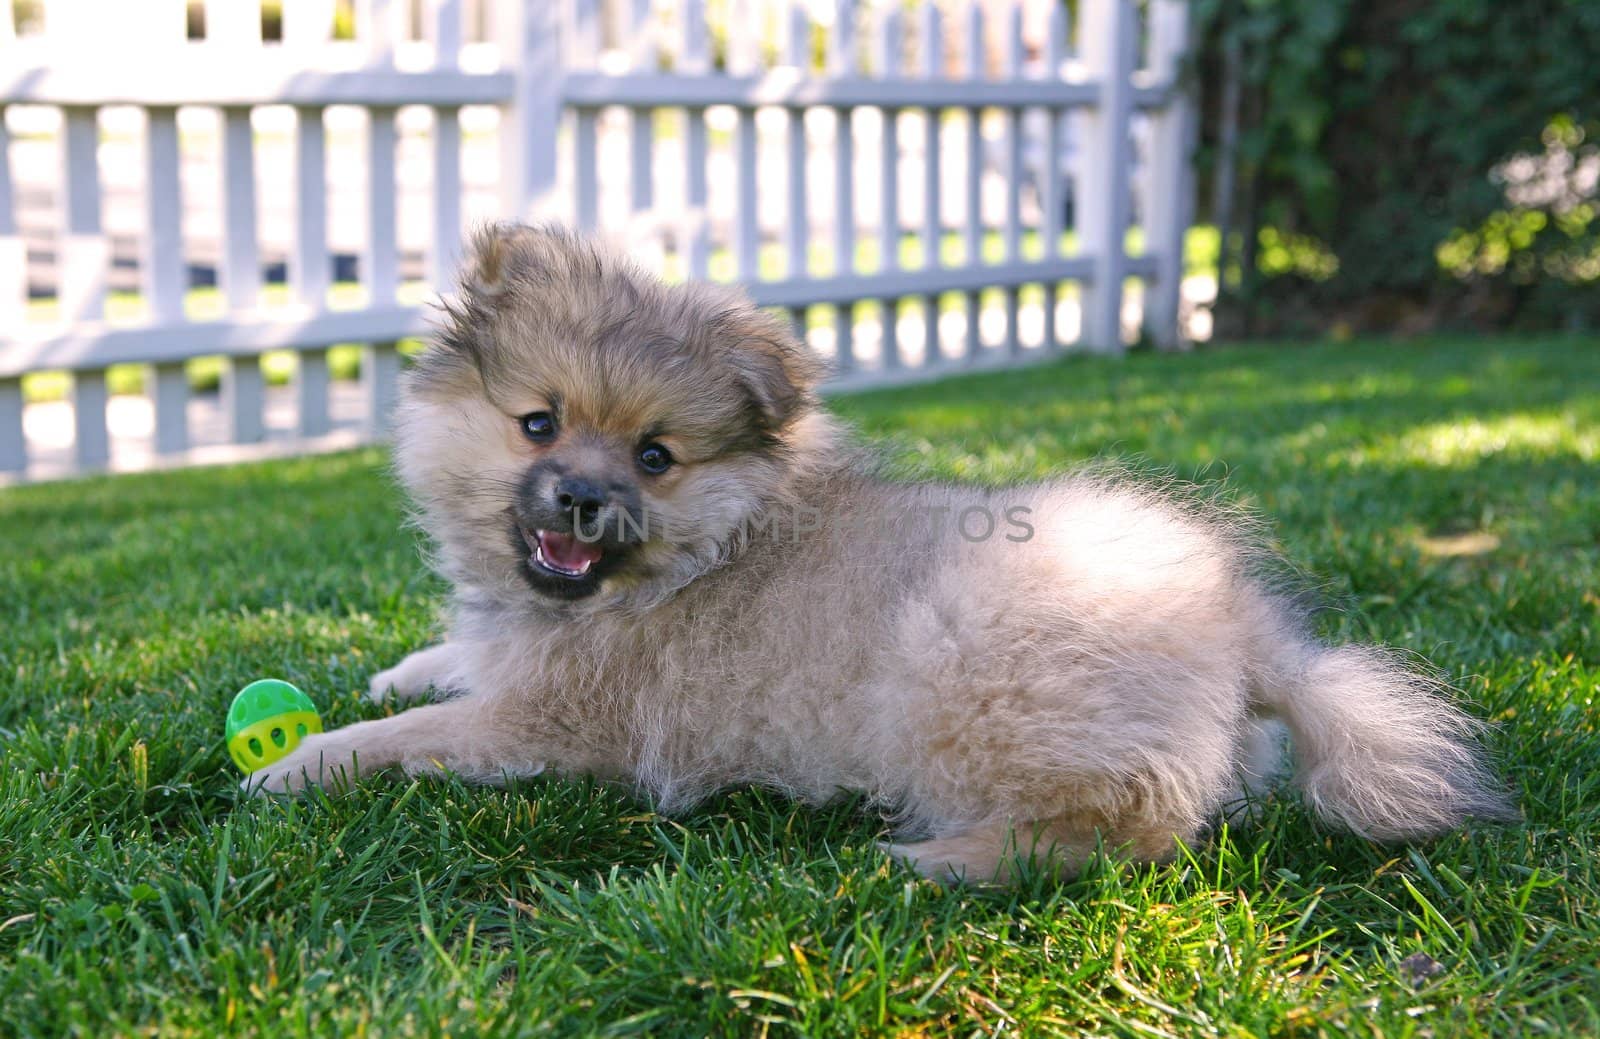 Cute Puppy Pomeranian Dog Playing Outdoors in the Shade on Grass